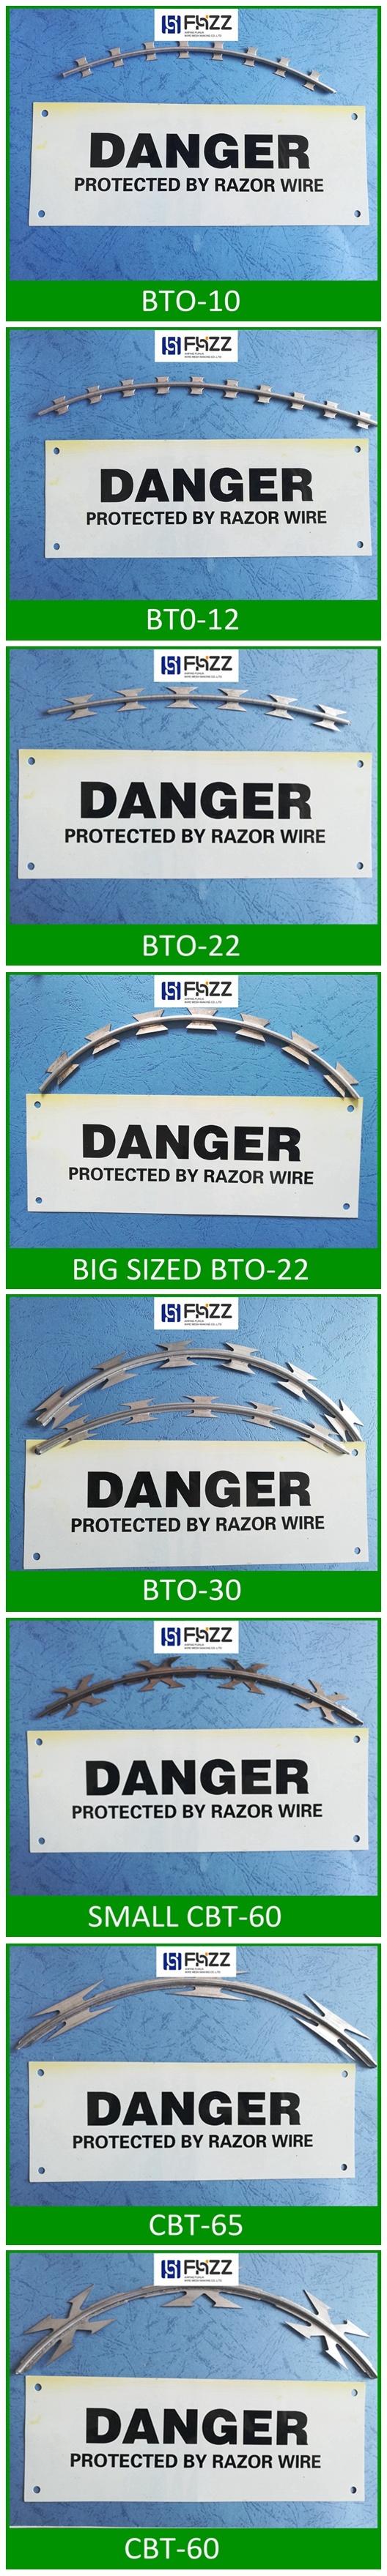 High Security Steel and Razor Wire Fence